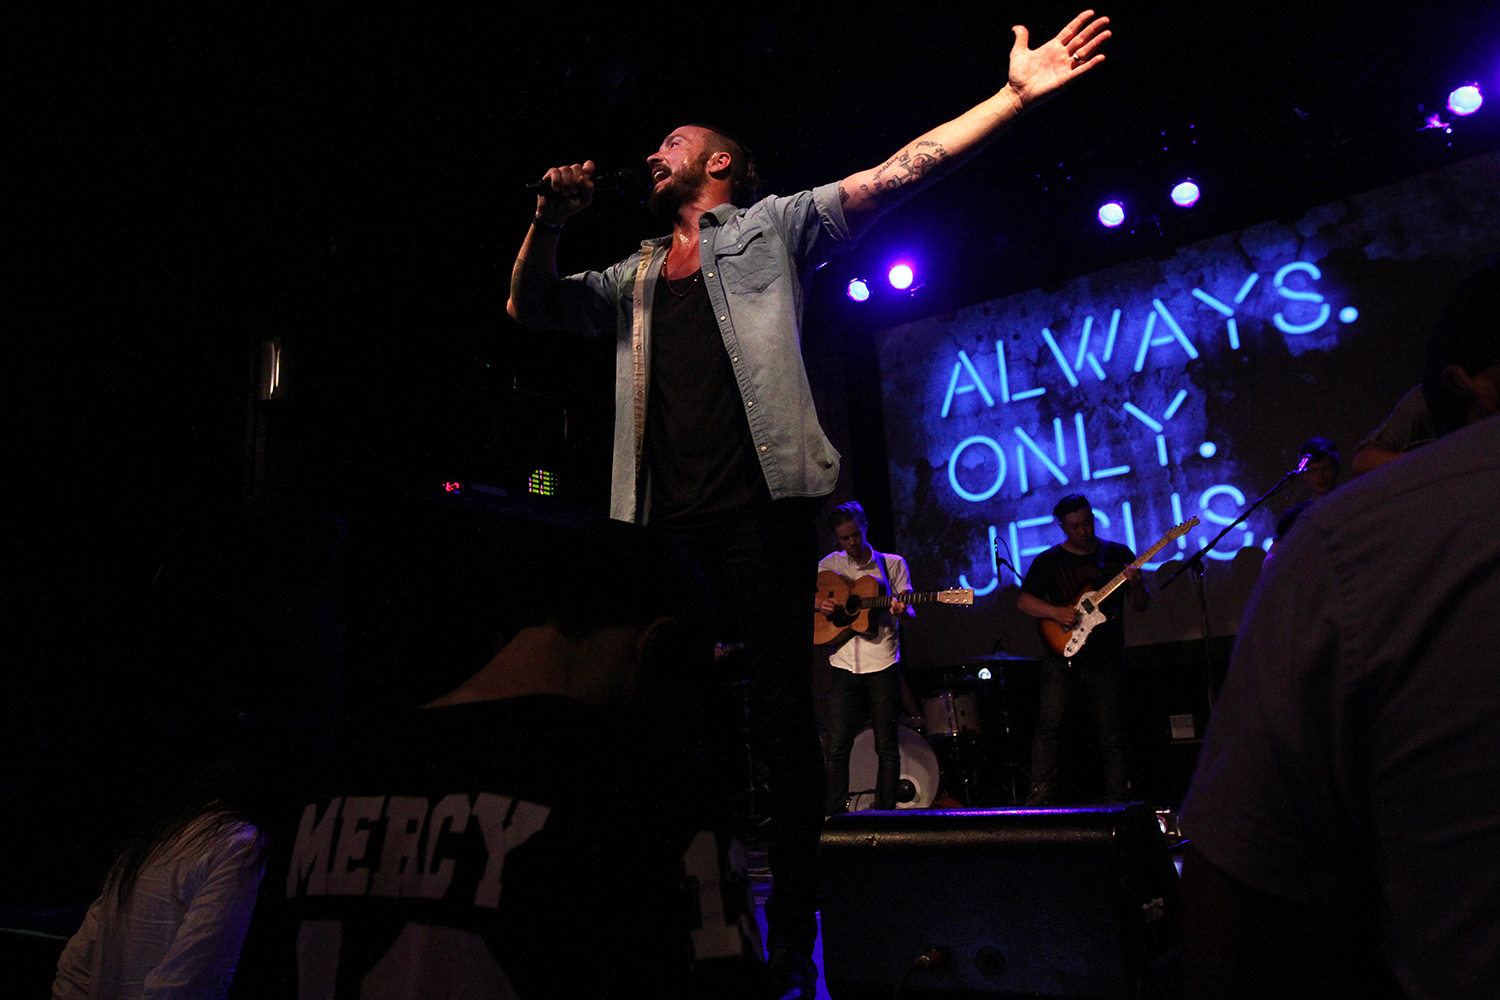 In this July 14, 2013 photo, then-pastor Carl Lentz leads a Hillsong NYC Church service at Irving Plaza in New York. With his half-shaved head, jeans and tattoos, Lentz doesn't look like the typical religious leader. But with its concert-like atmosphere and appeal to a younger demographic, his congregation, Hillsong NYC, is one of the fastest-growing evangelical churches in the city. (AP Photo/Tina Fineberg)